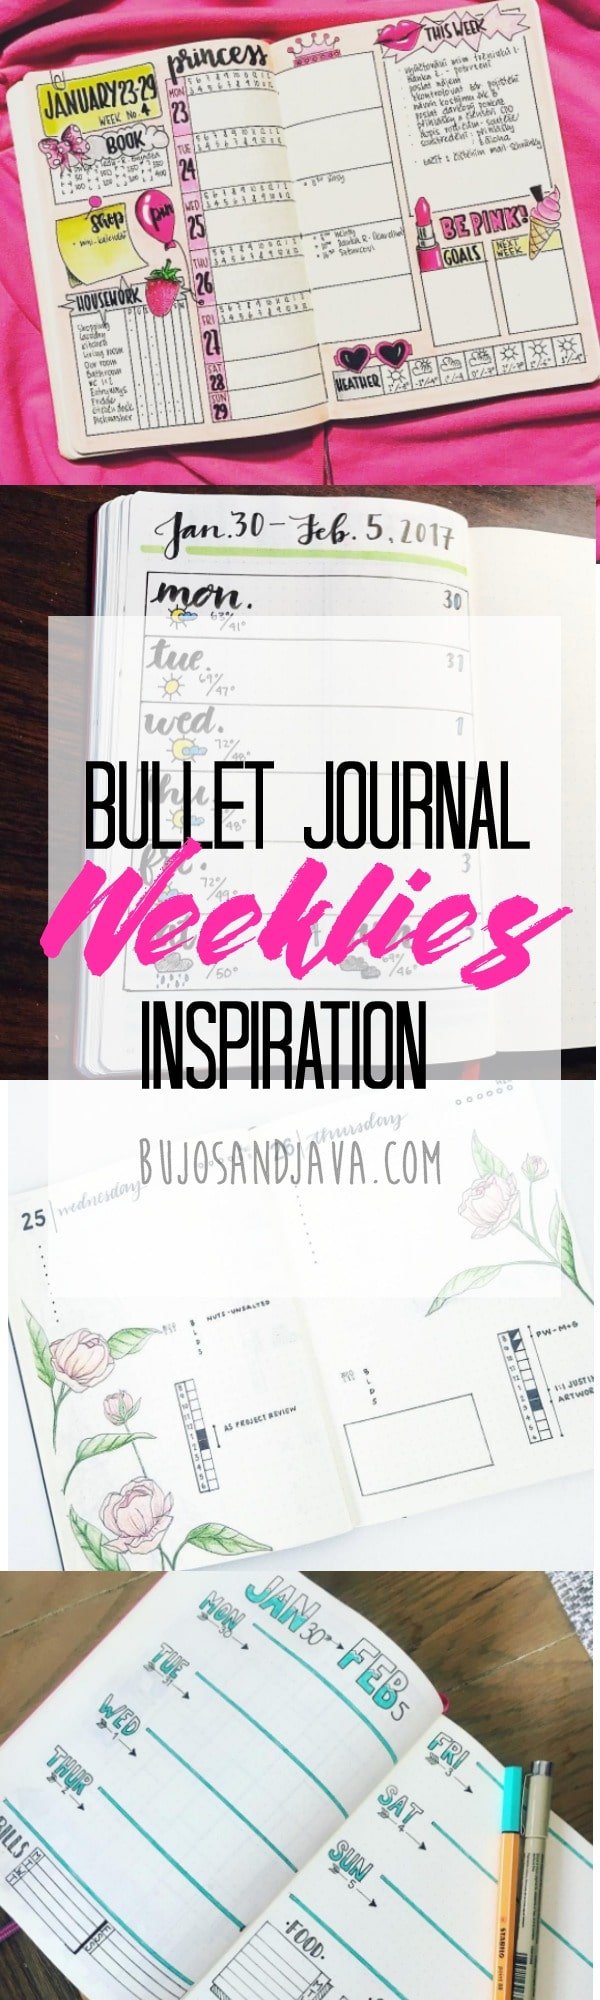 Bullet Journal Weeklies Inspiration from the most creative and talented people on Instagram. From the minimalistic layouts to full-color spreads, you will find something that will spark your creativity.